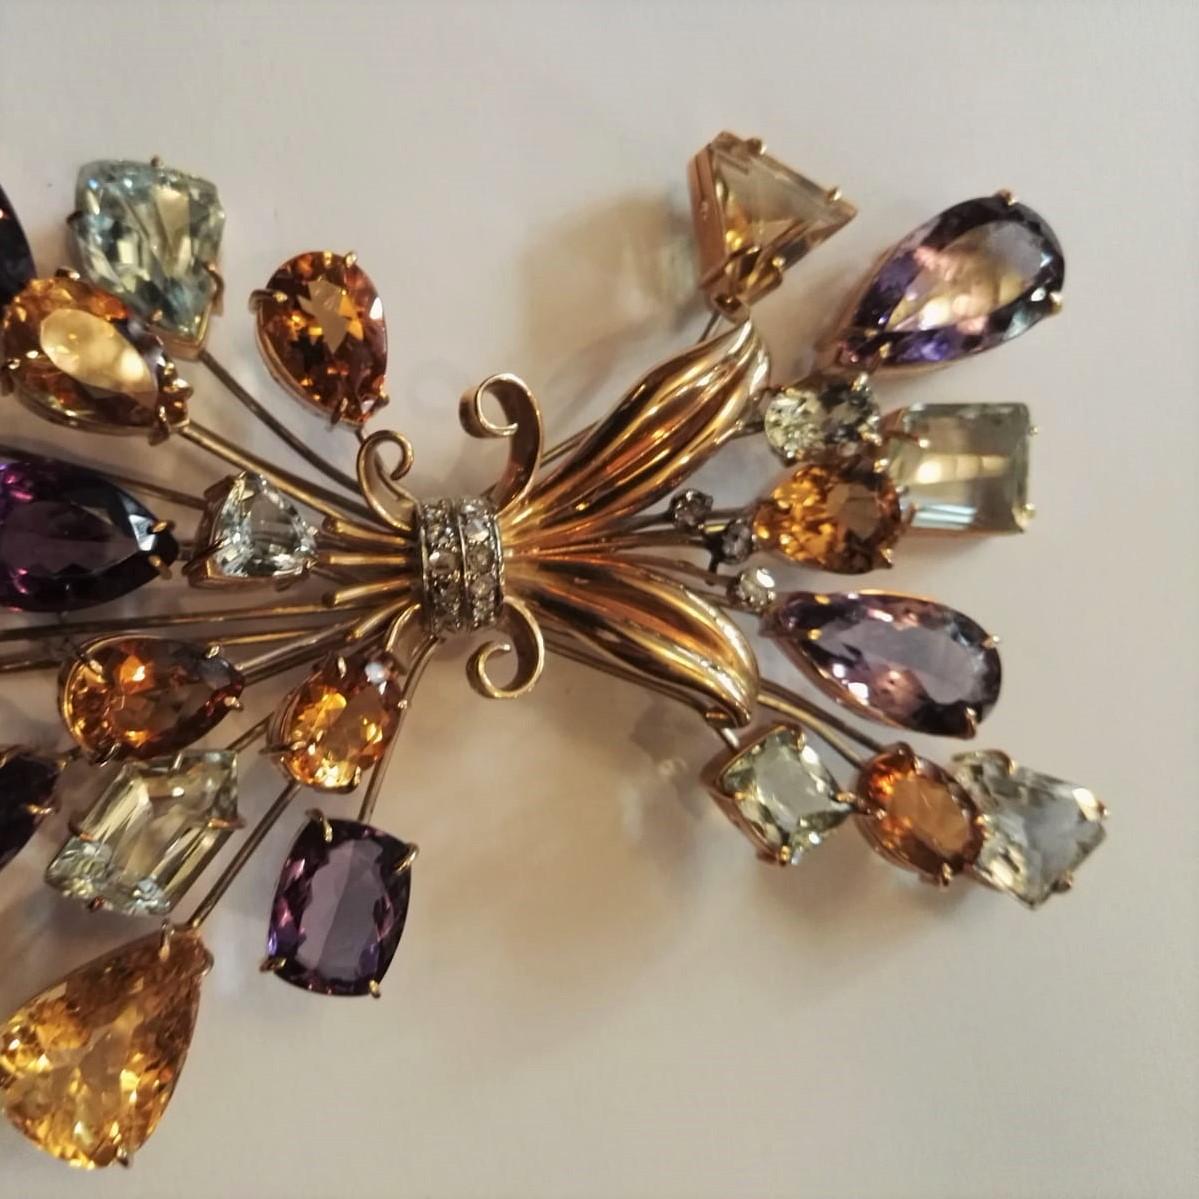 Multicolor brooch in 18kt rose and white gold with fancy cut stones and small diamond
Stones Details: 
Aquamarine abt. Carat 50.00
Amethyst abt. Carat 70.00
Quartz abt. Carat 50.00
Total weight: gr 87